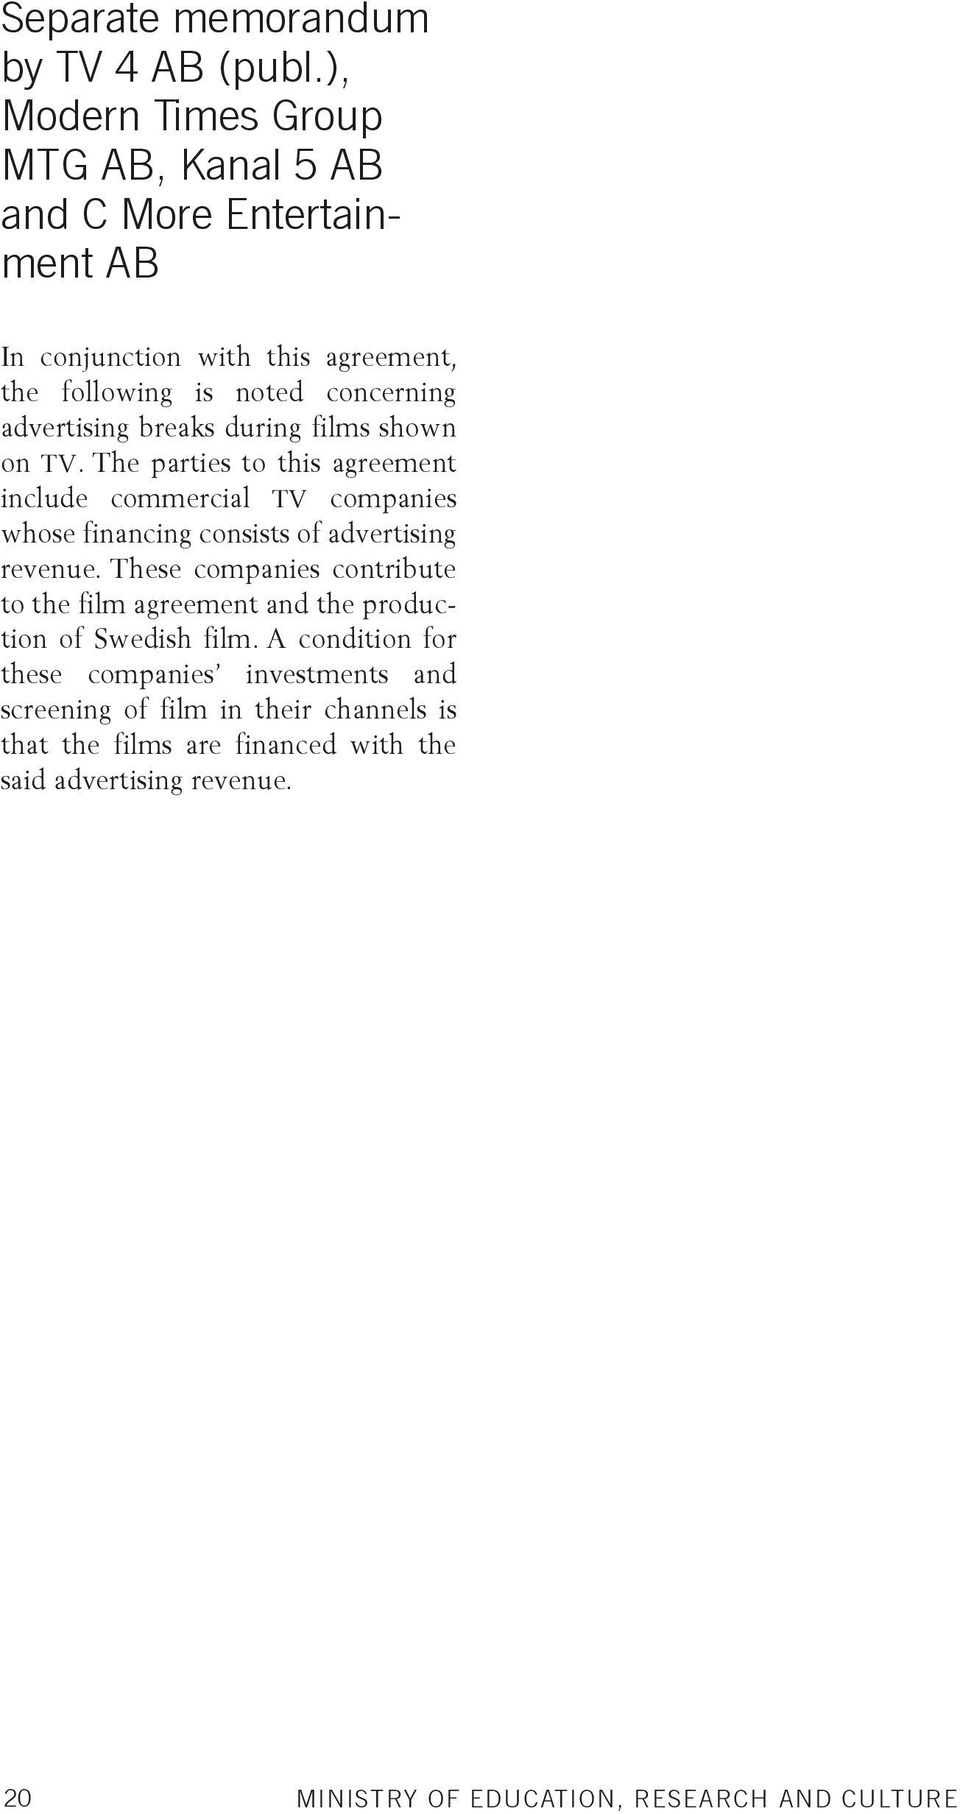 breaks during films shown on TV. The parties to this agreement include commercial TV companies whose financing consists of advertising revenue.